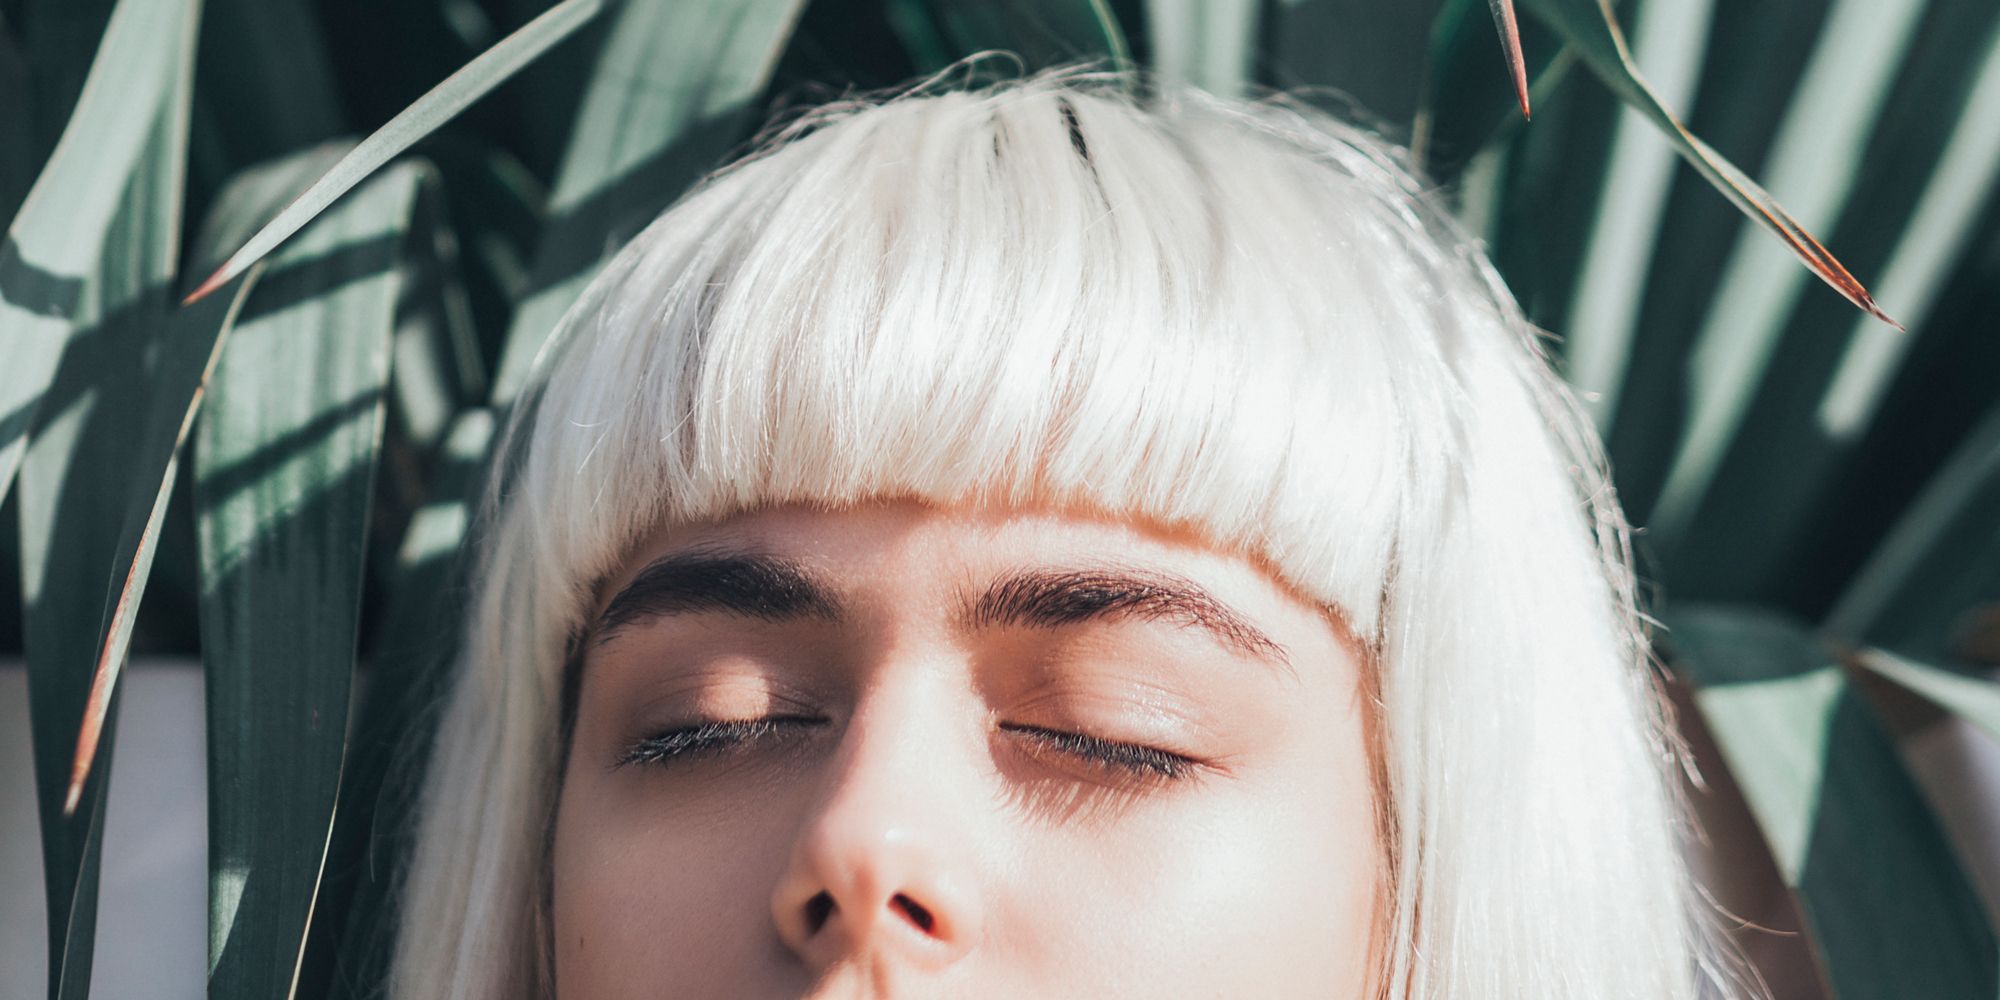 woman with bleached blonde hair and dark eyebrows with eyes closed